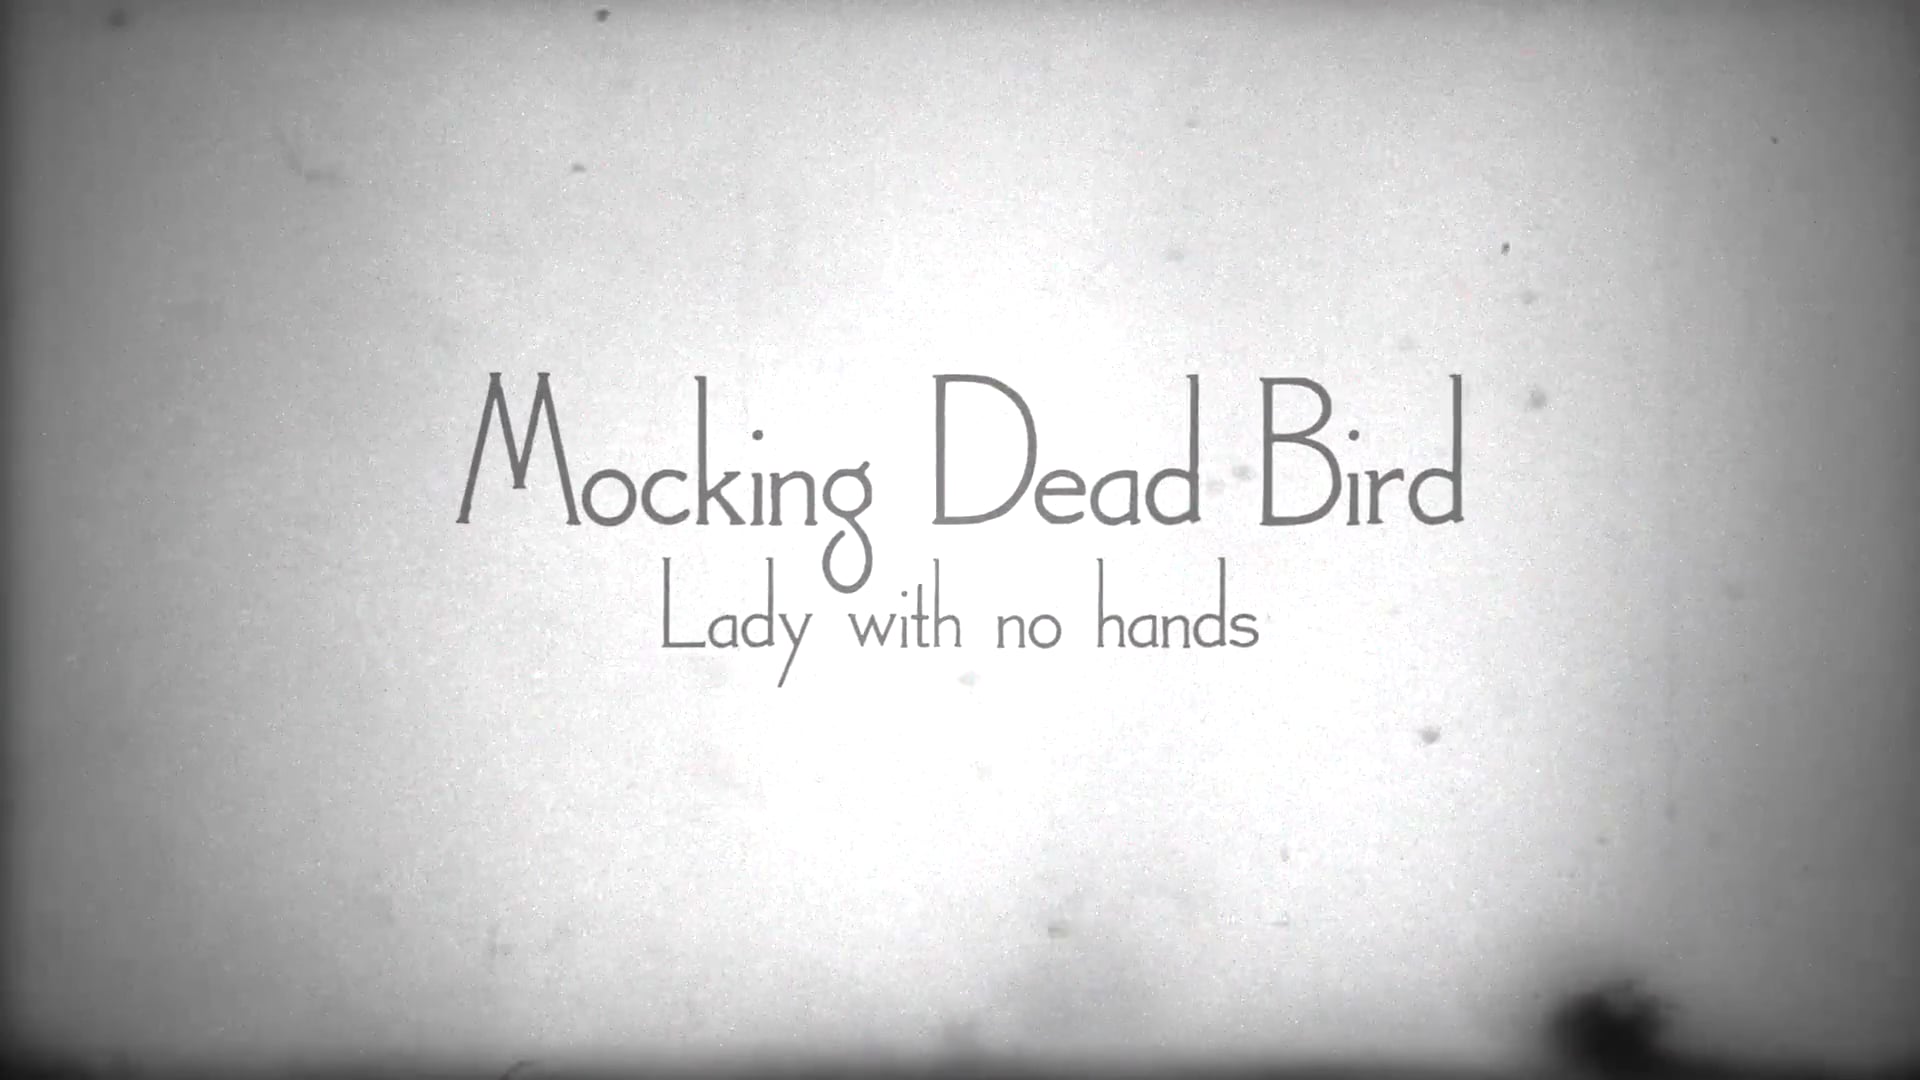 Mocking Dead Bird - Lady with no hands